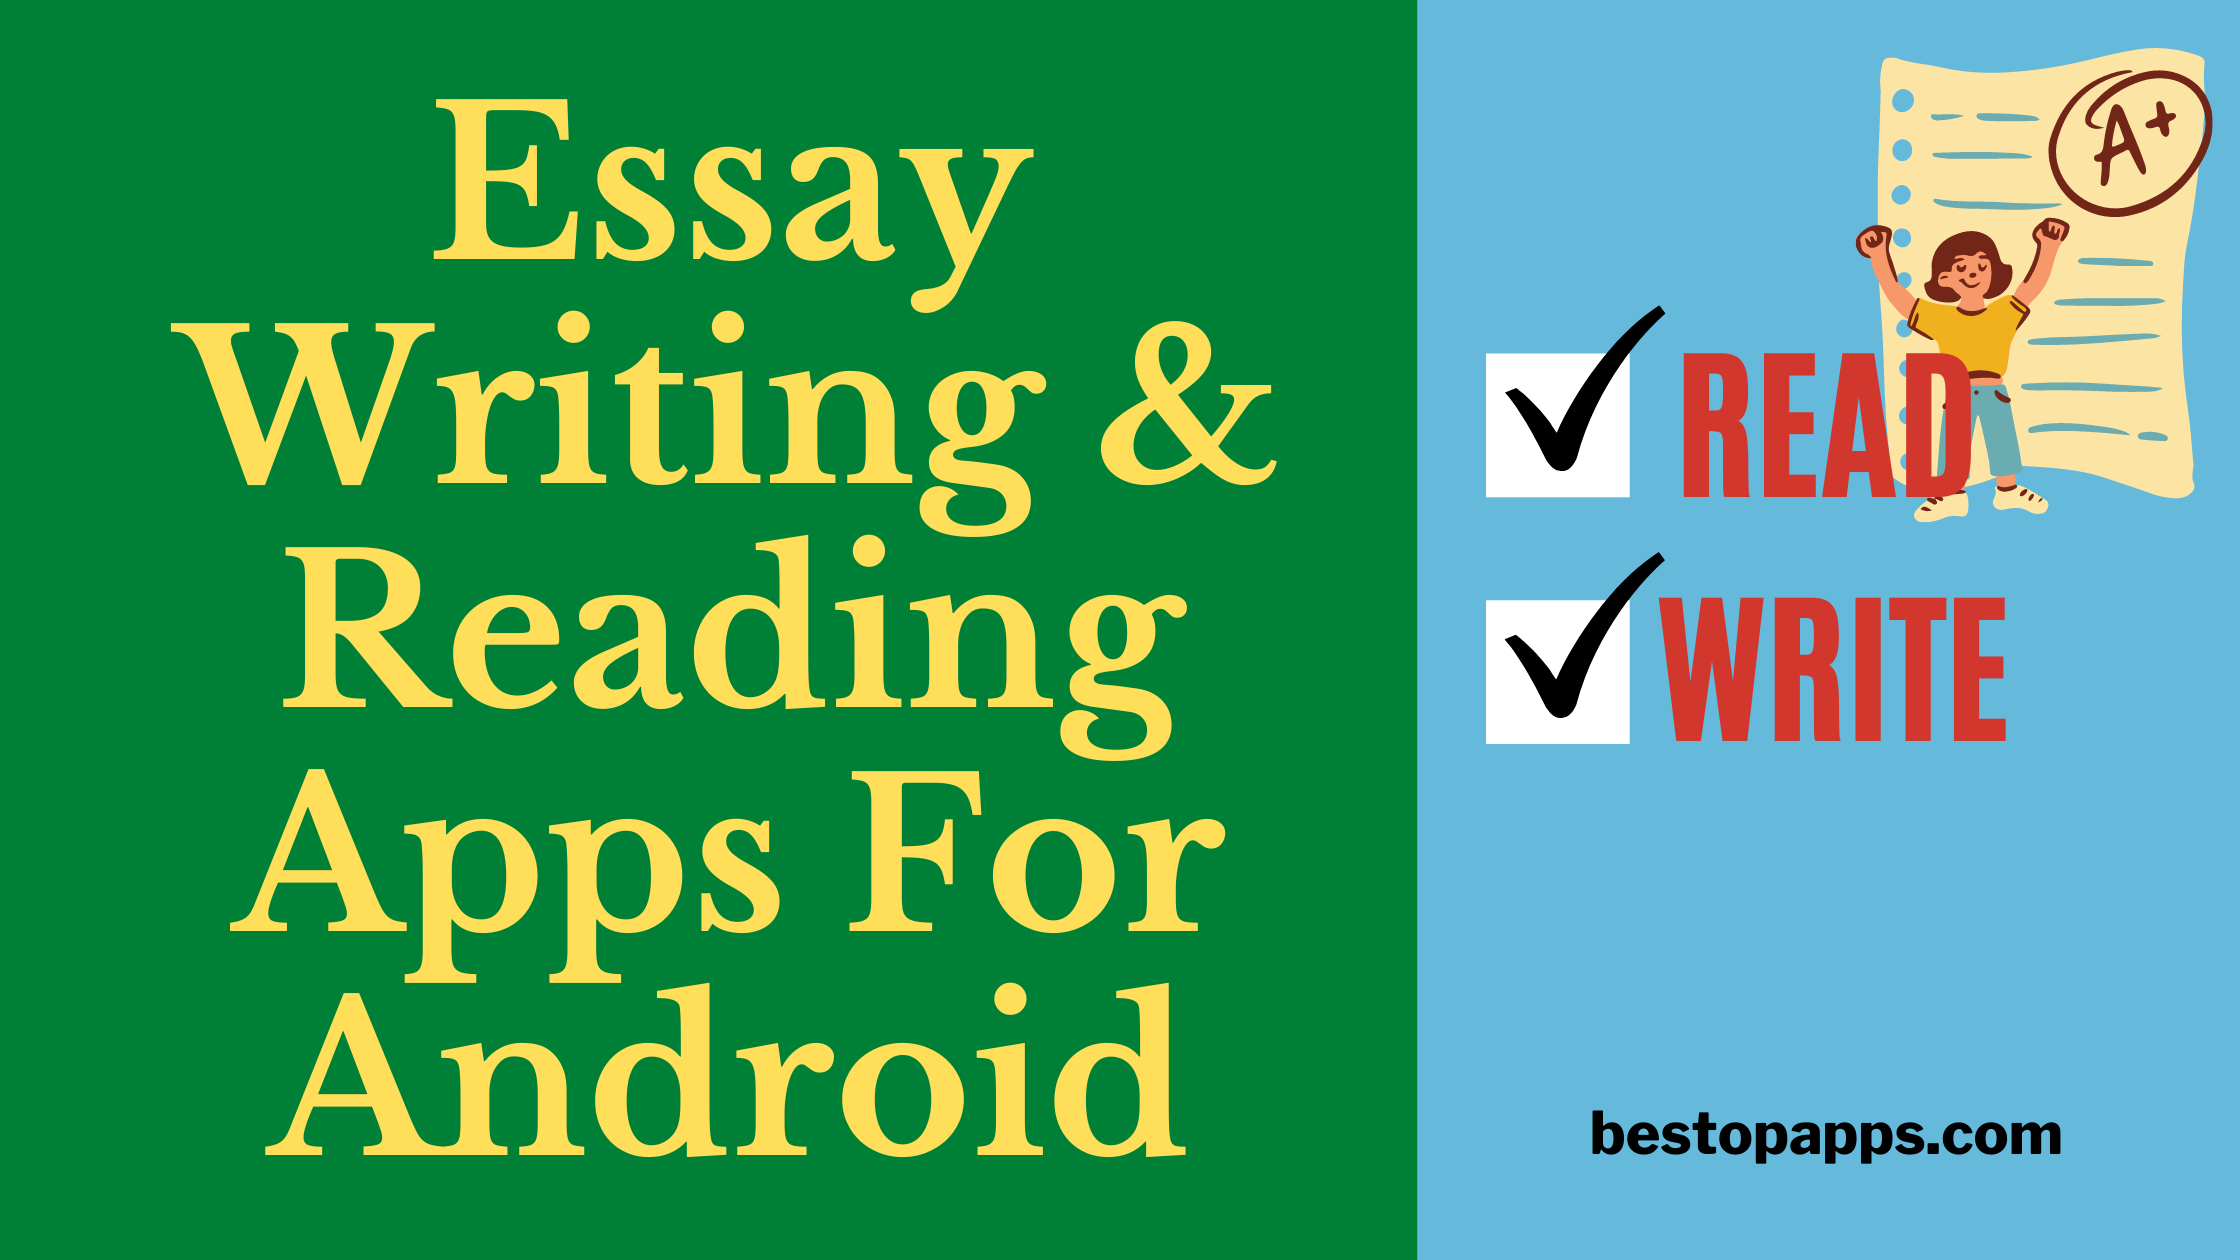 Essay Writing And Reading Apps